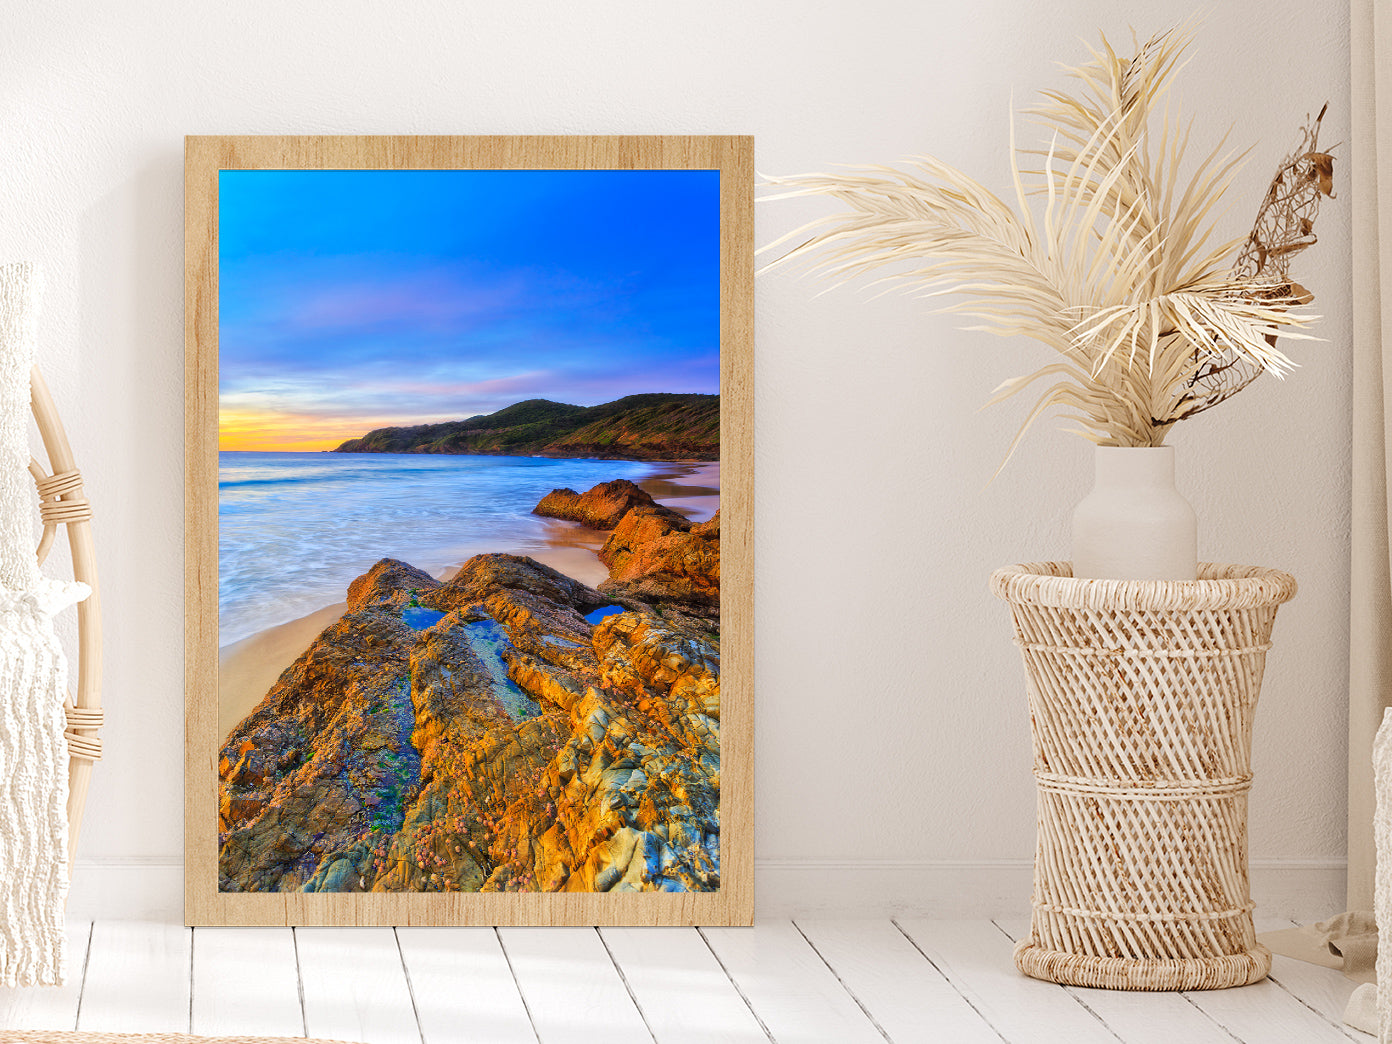 Seascape Sunrise At Burgess Beach Glass Framed Wall Art, Ready to Hang Quality Print Without White Border Oak